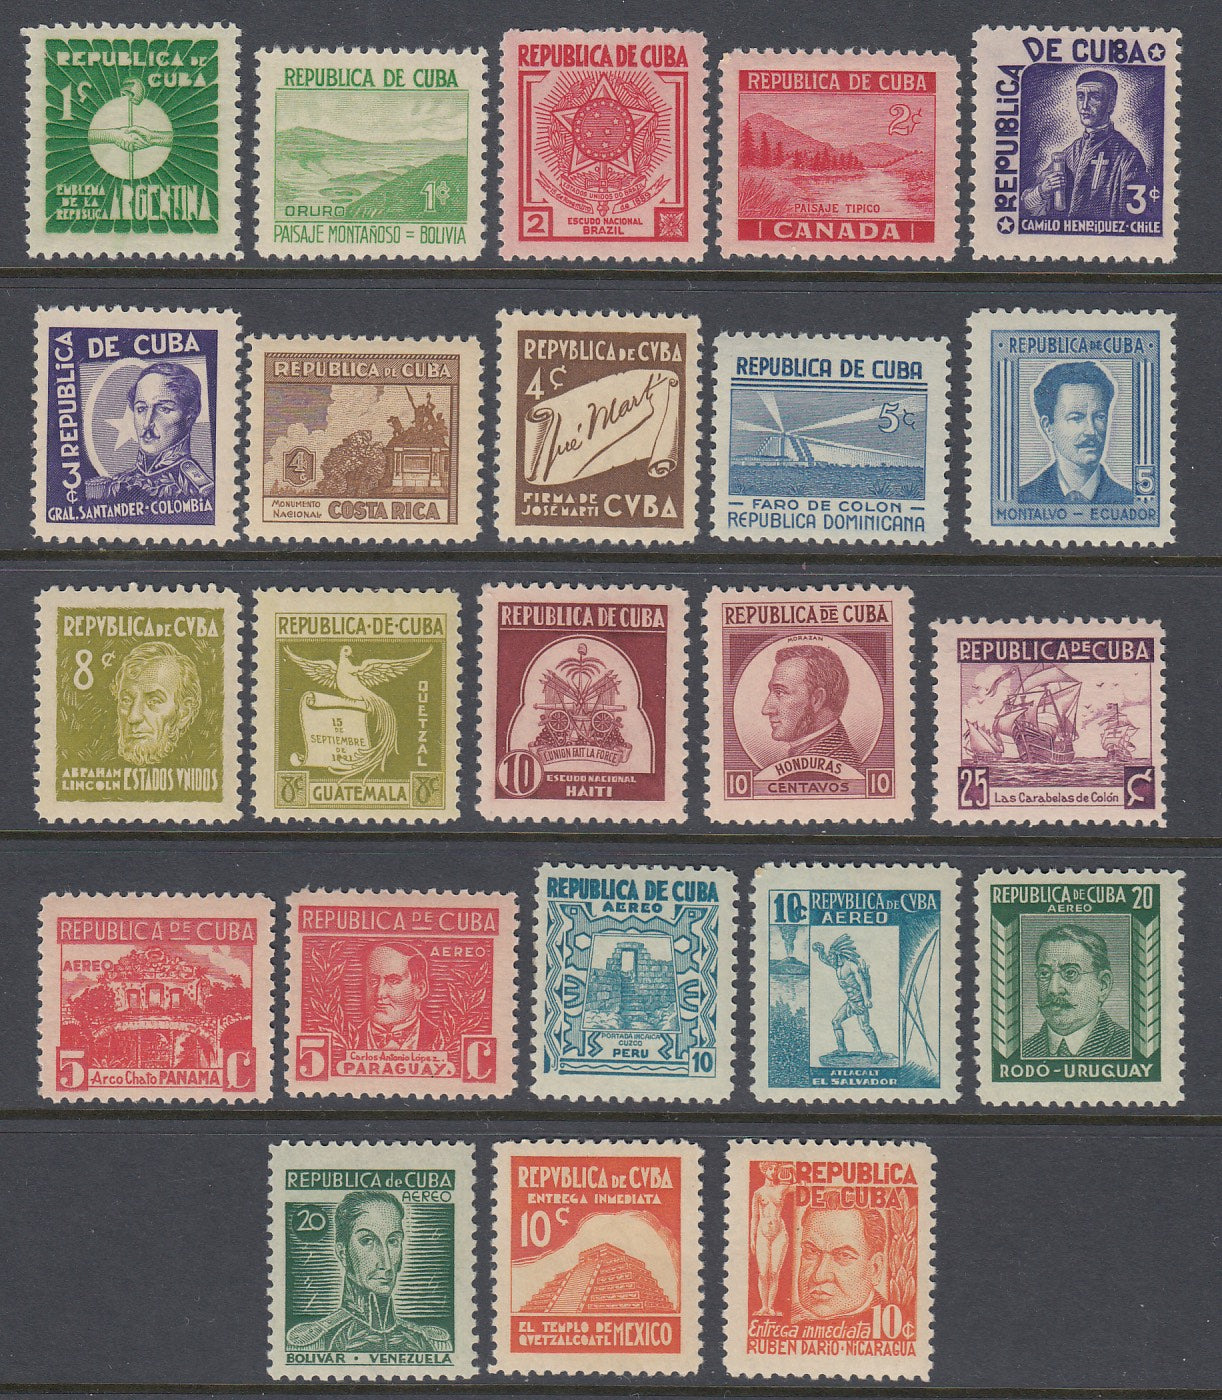 Cuba 1937 American Nations Complete Set (including Airmail and Special Delivery) MNH. Scott 340-354, C24-C29, E10-E11